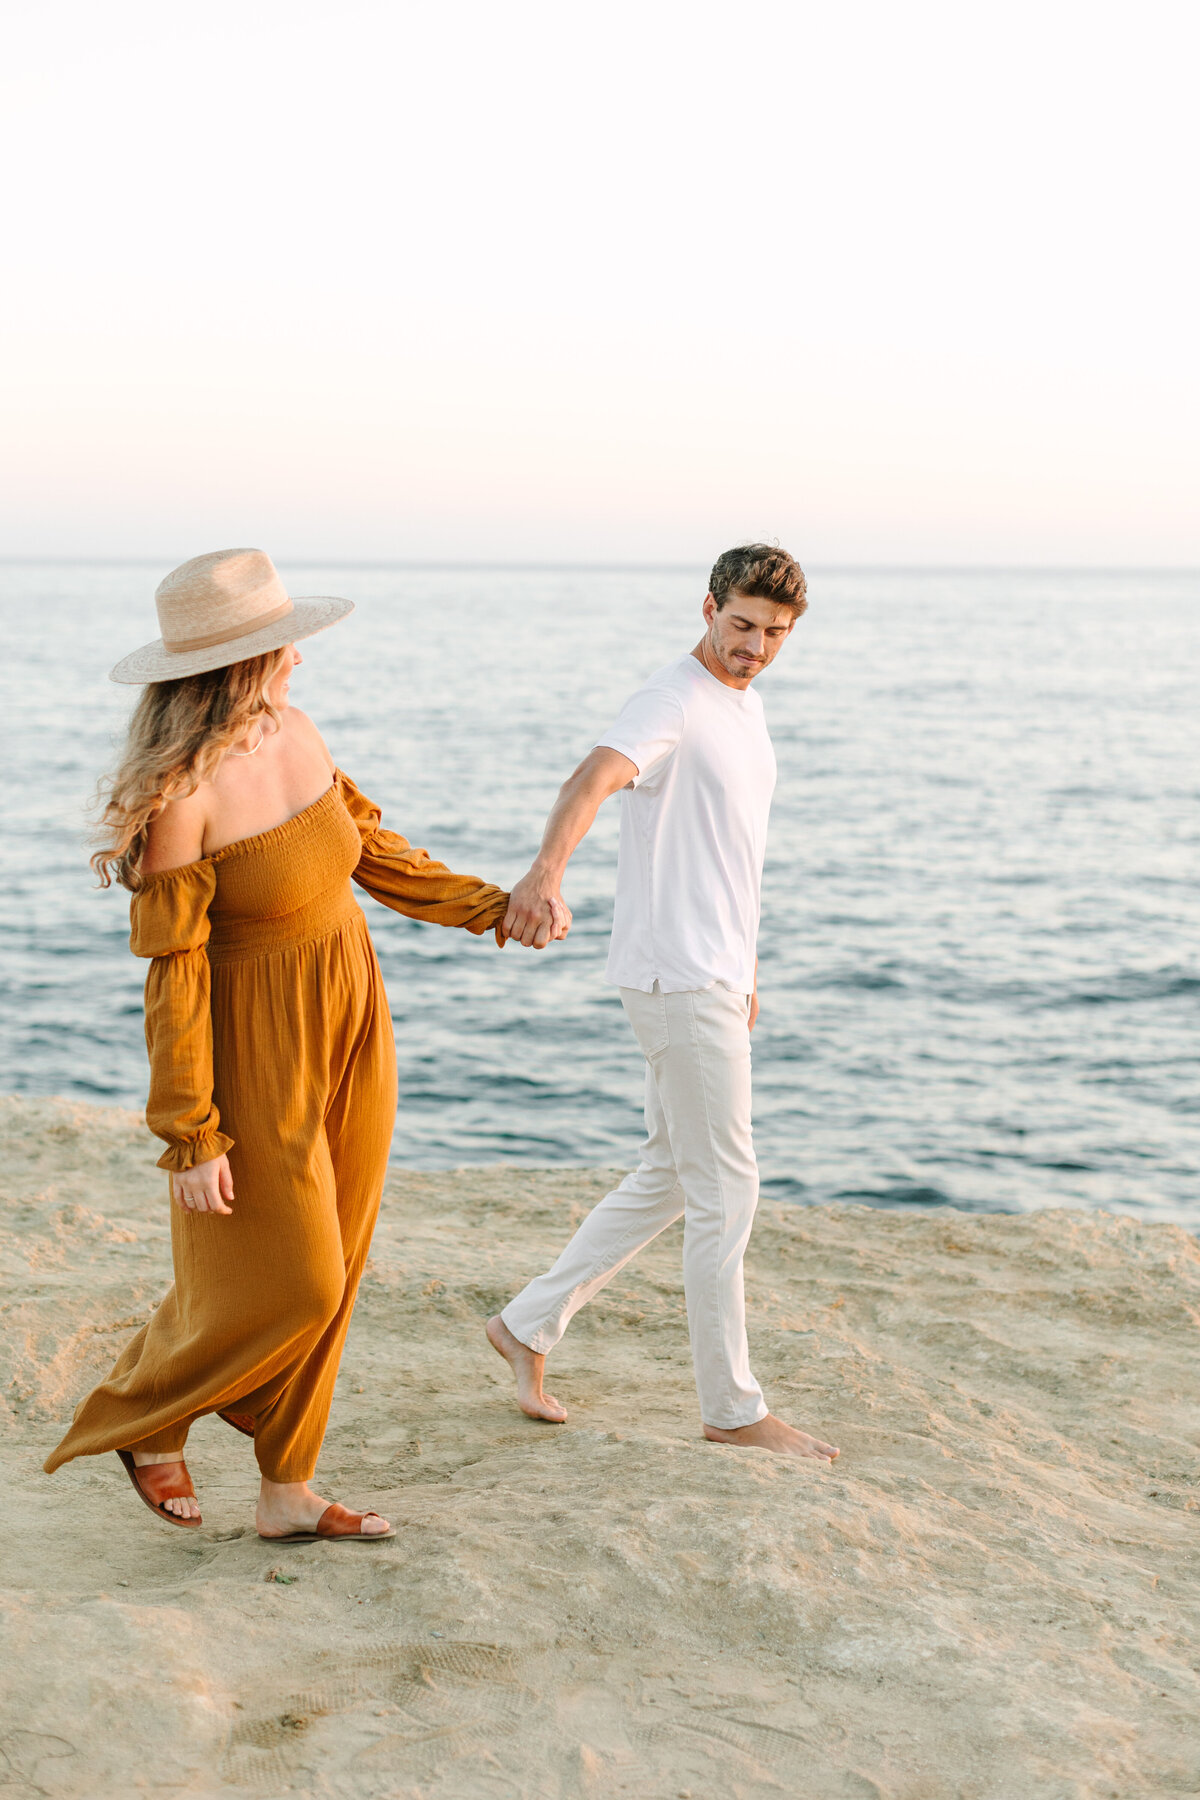 engaged couple dressed in casual boho clothes walking on beach holding hands.